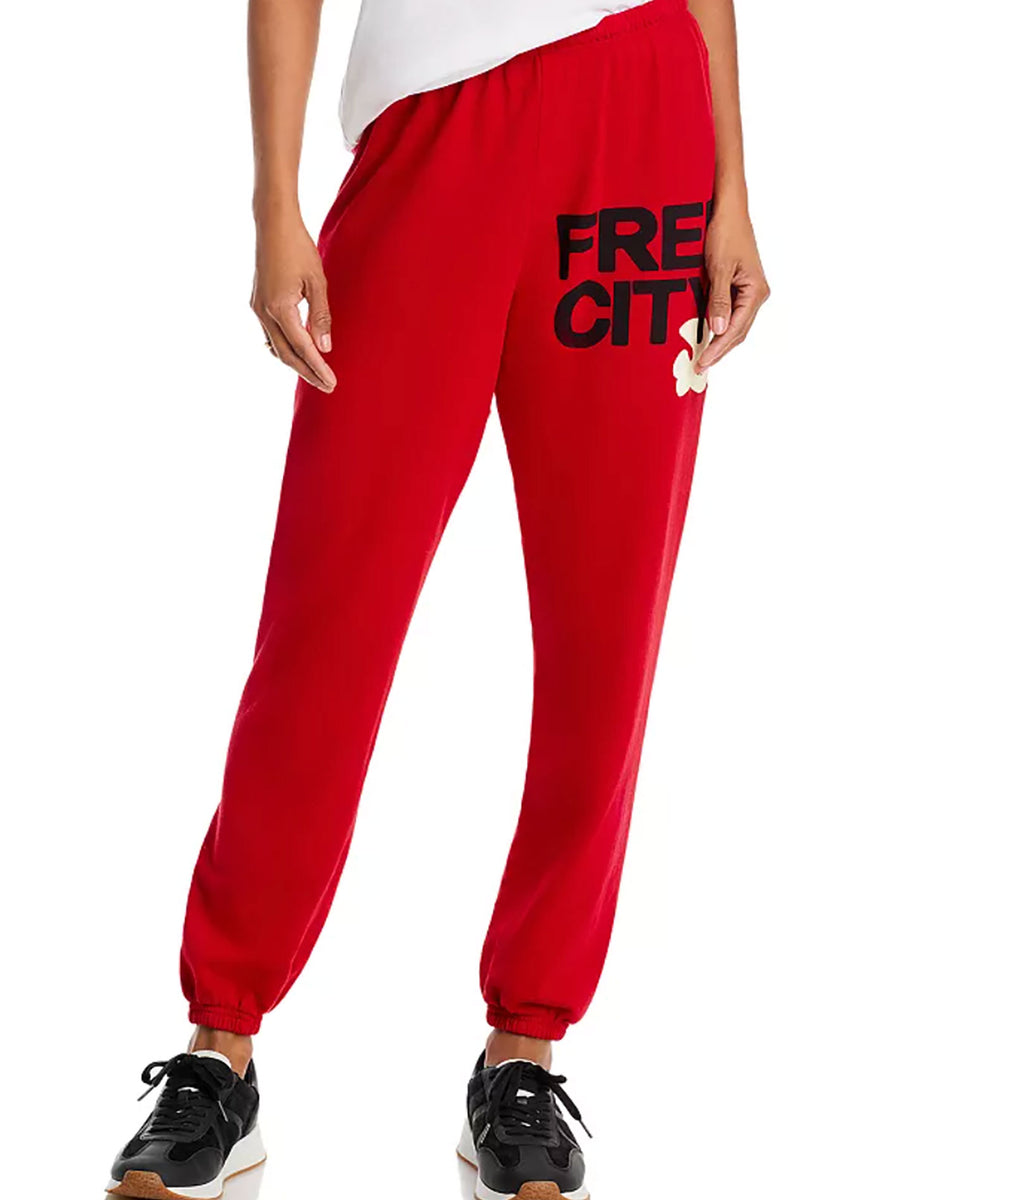 The All Over Heart Sweatpants - Cream/Red – KULE